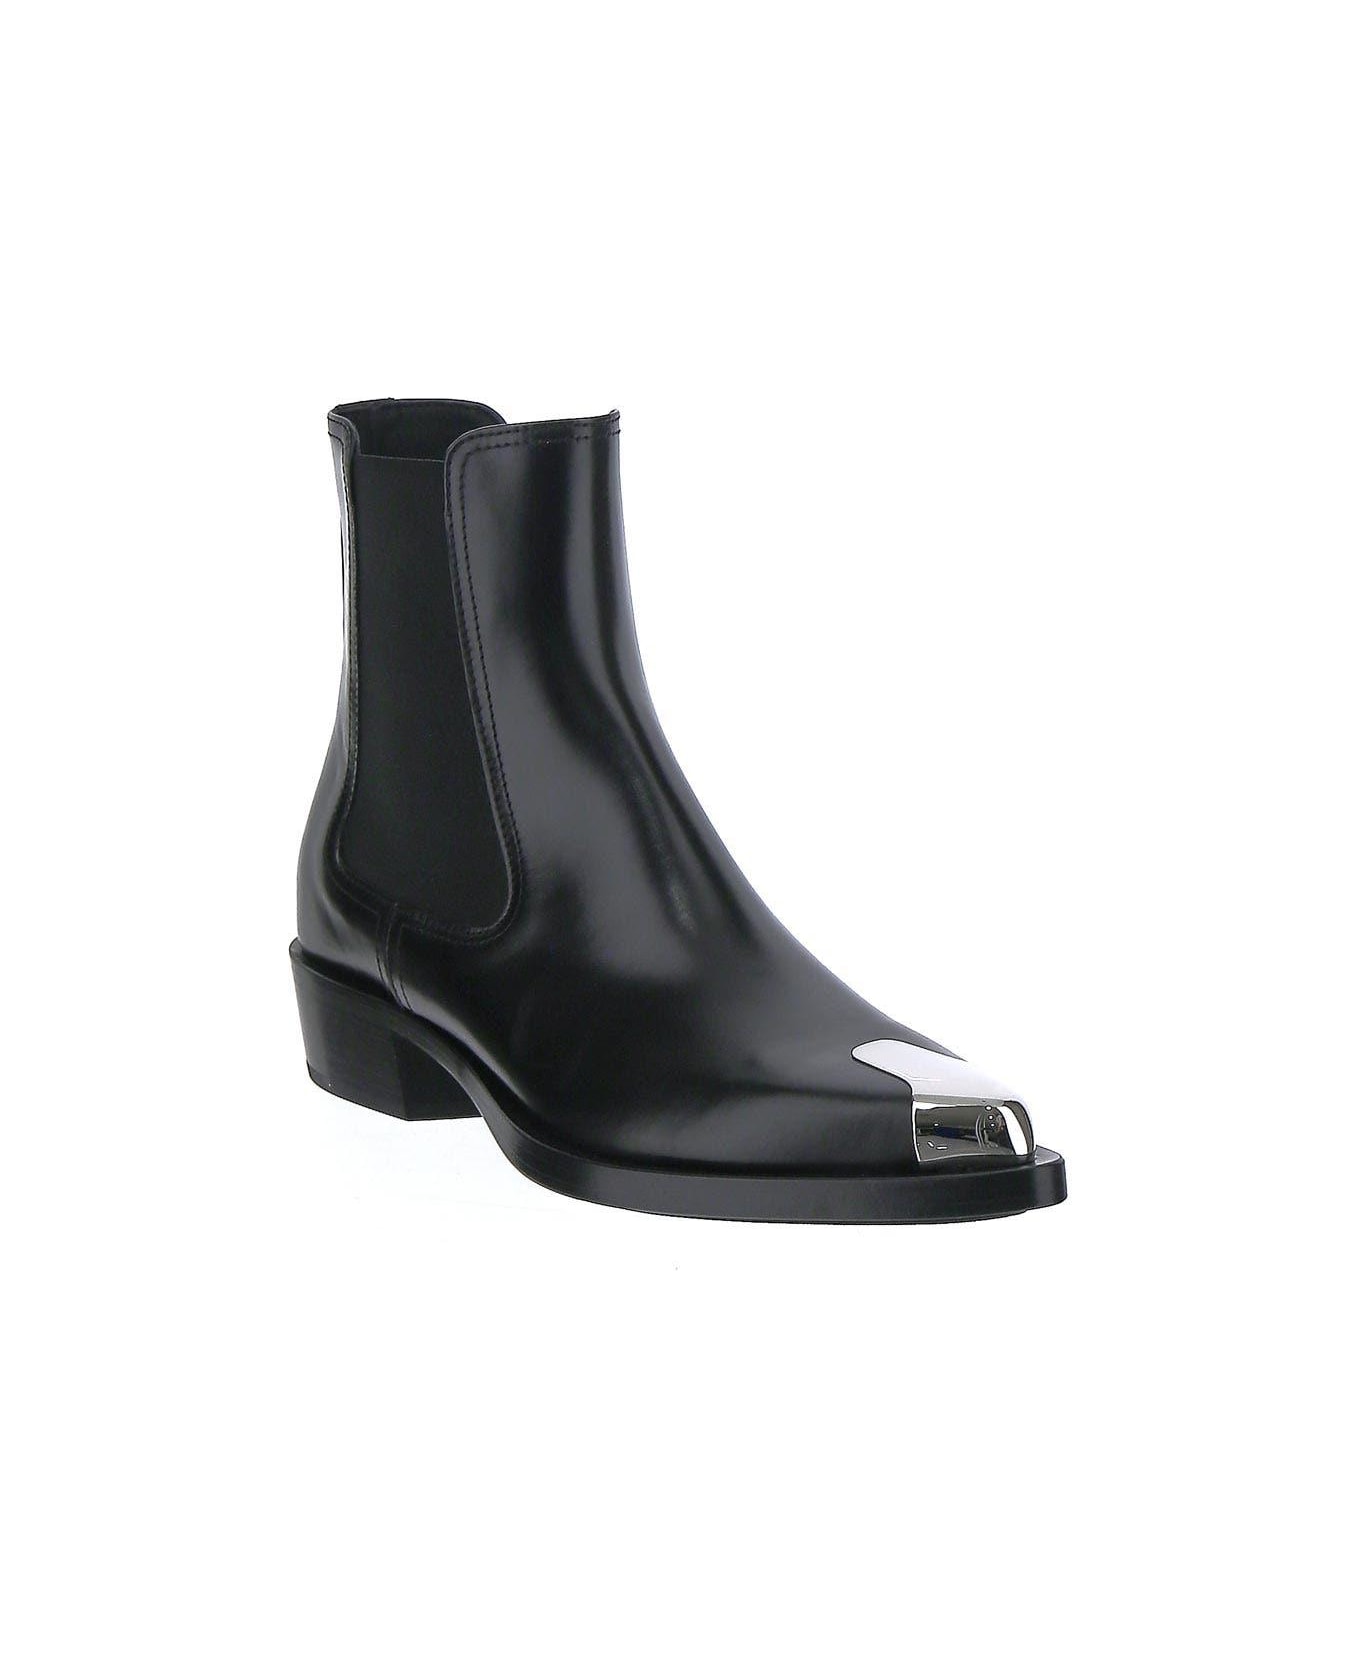 Alexander McQueen Leather Ankle Boots - Black